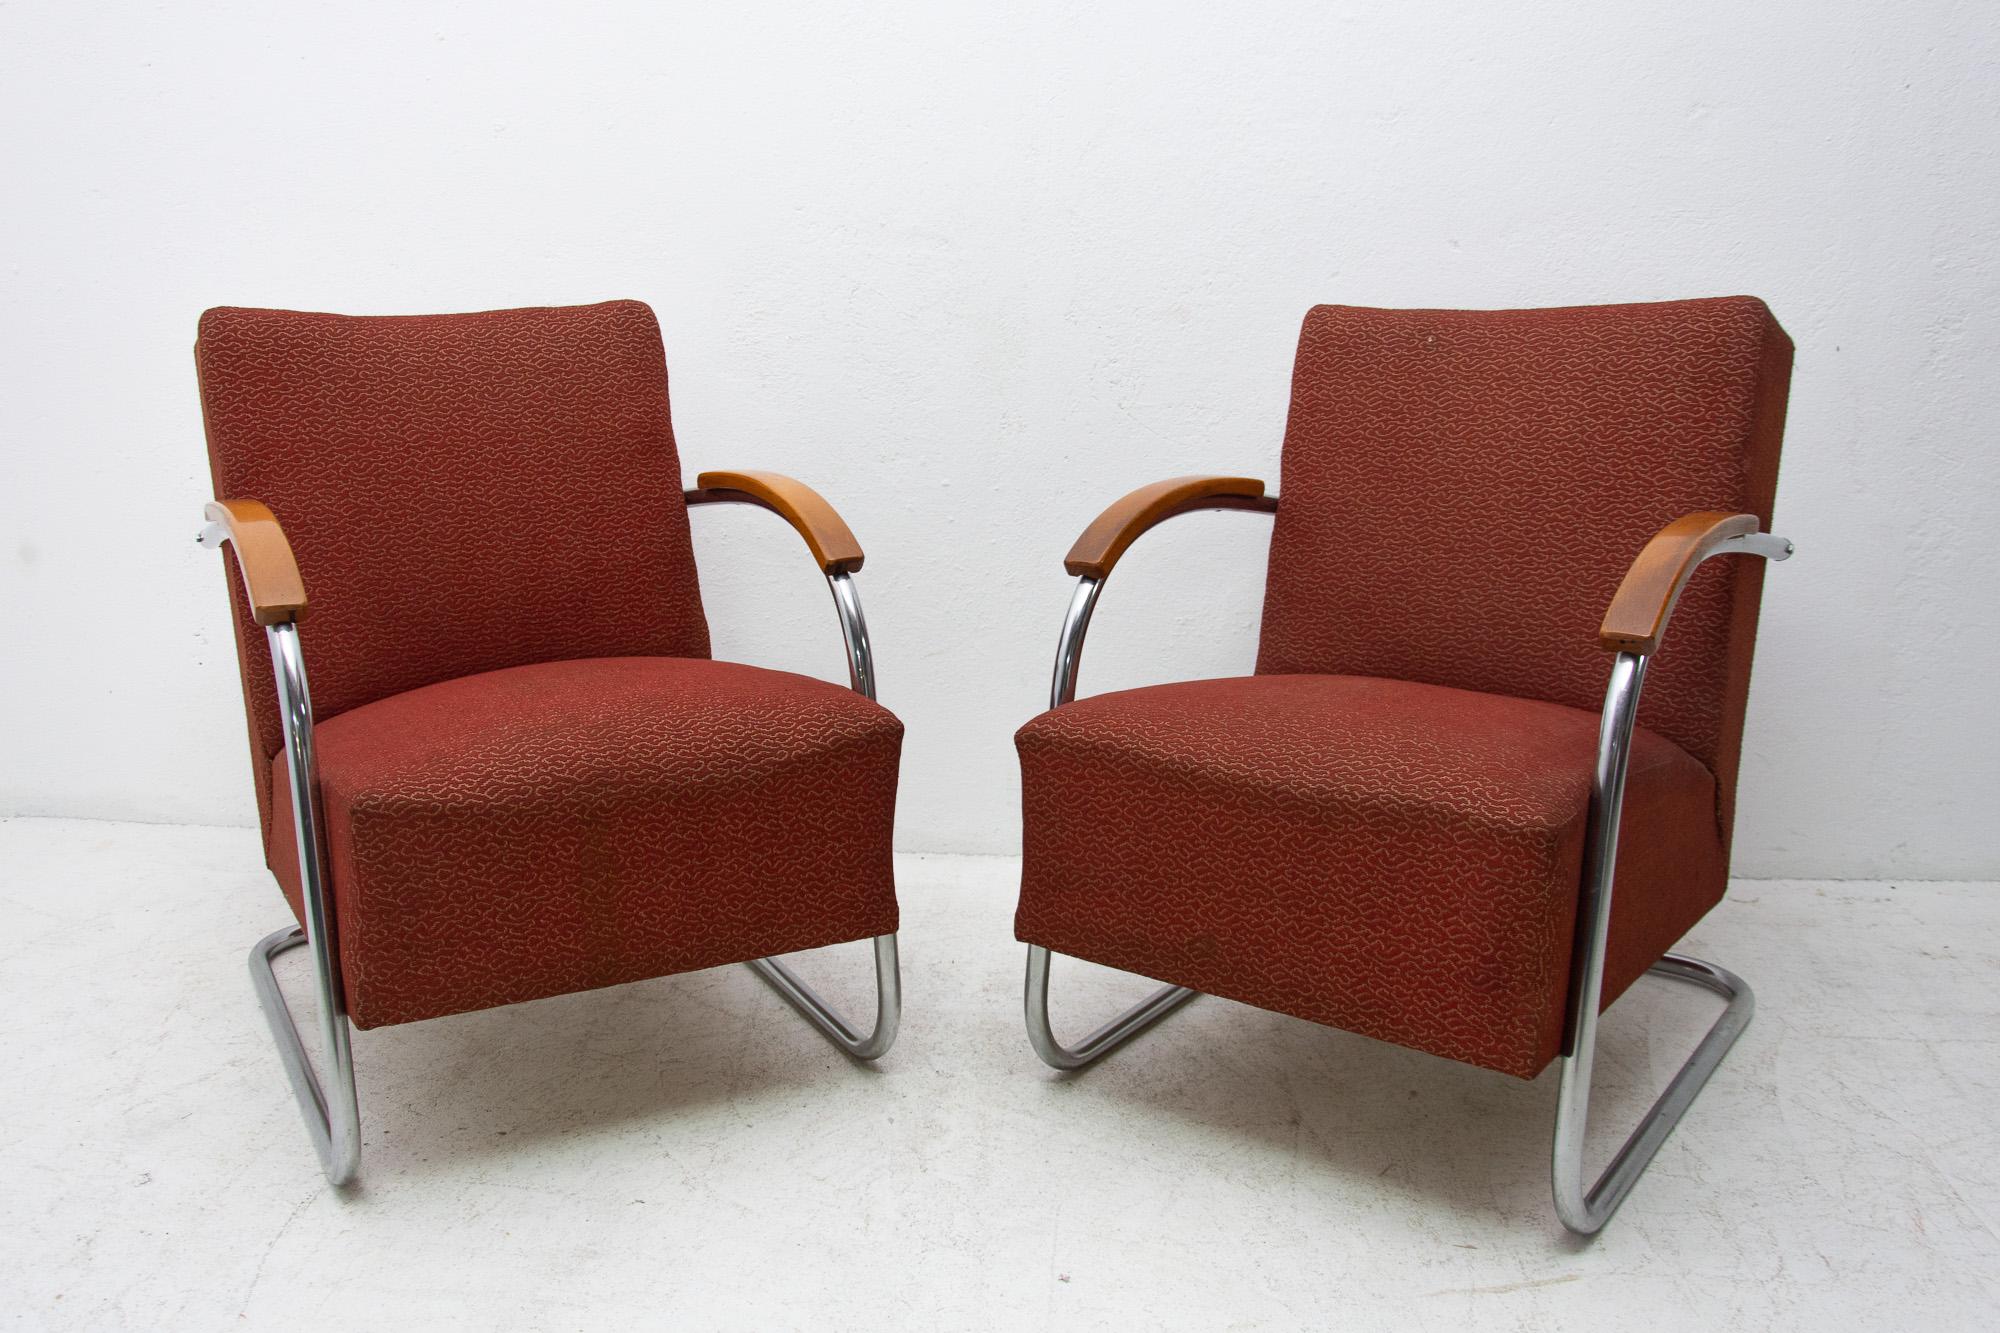 Pair of Cantilever tubular steel armchairs, it was originally manufactured by Mücke & Melder in the former Czechoslovakia in the 1930s. These chairs were made by Kovona Company in the 1950s. The armchairs are in good Vintage condition without any